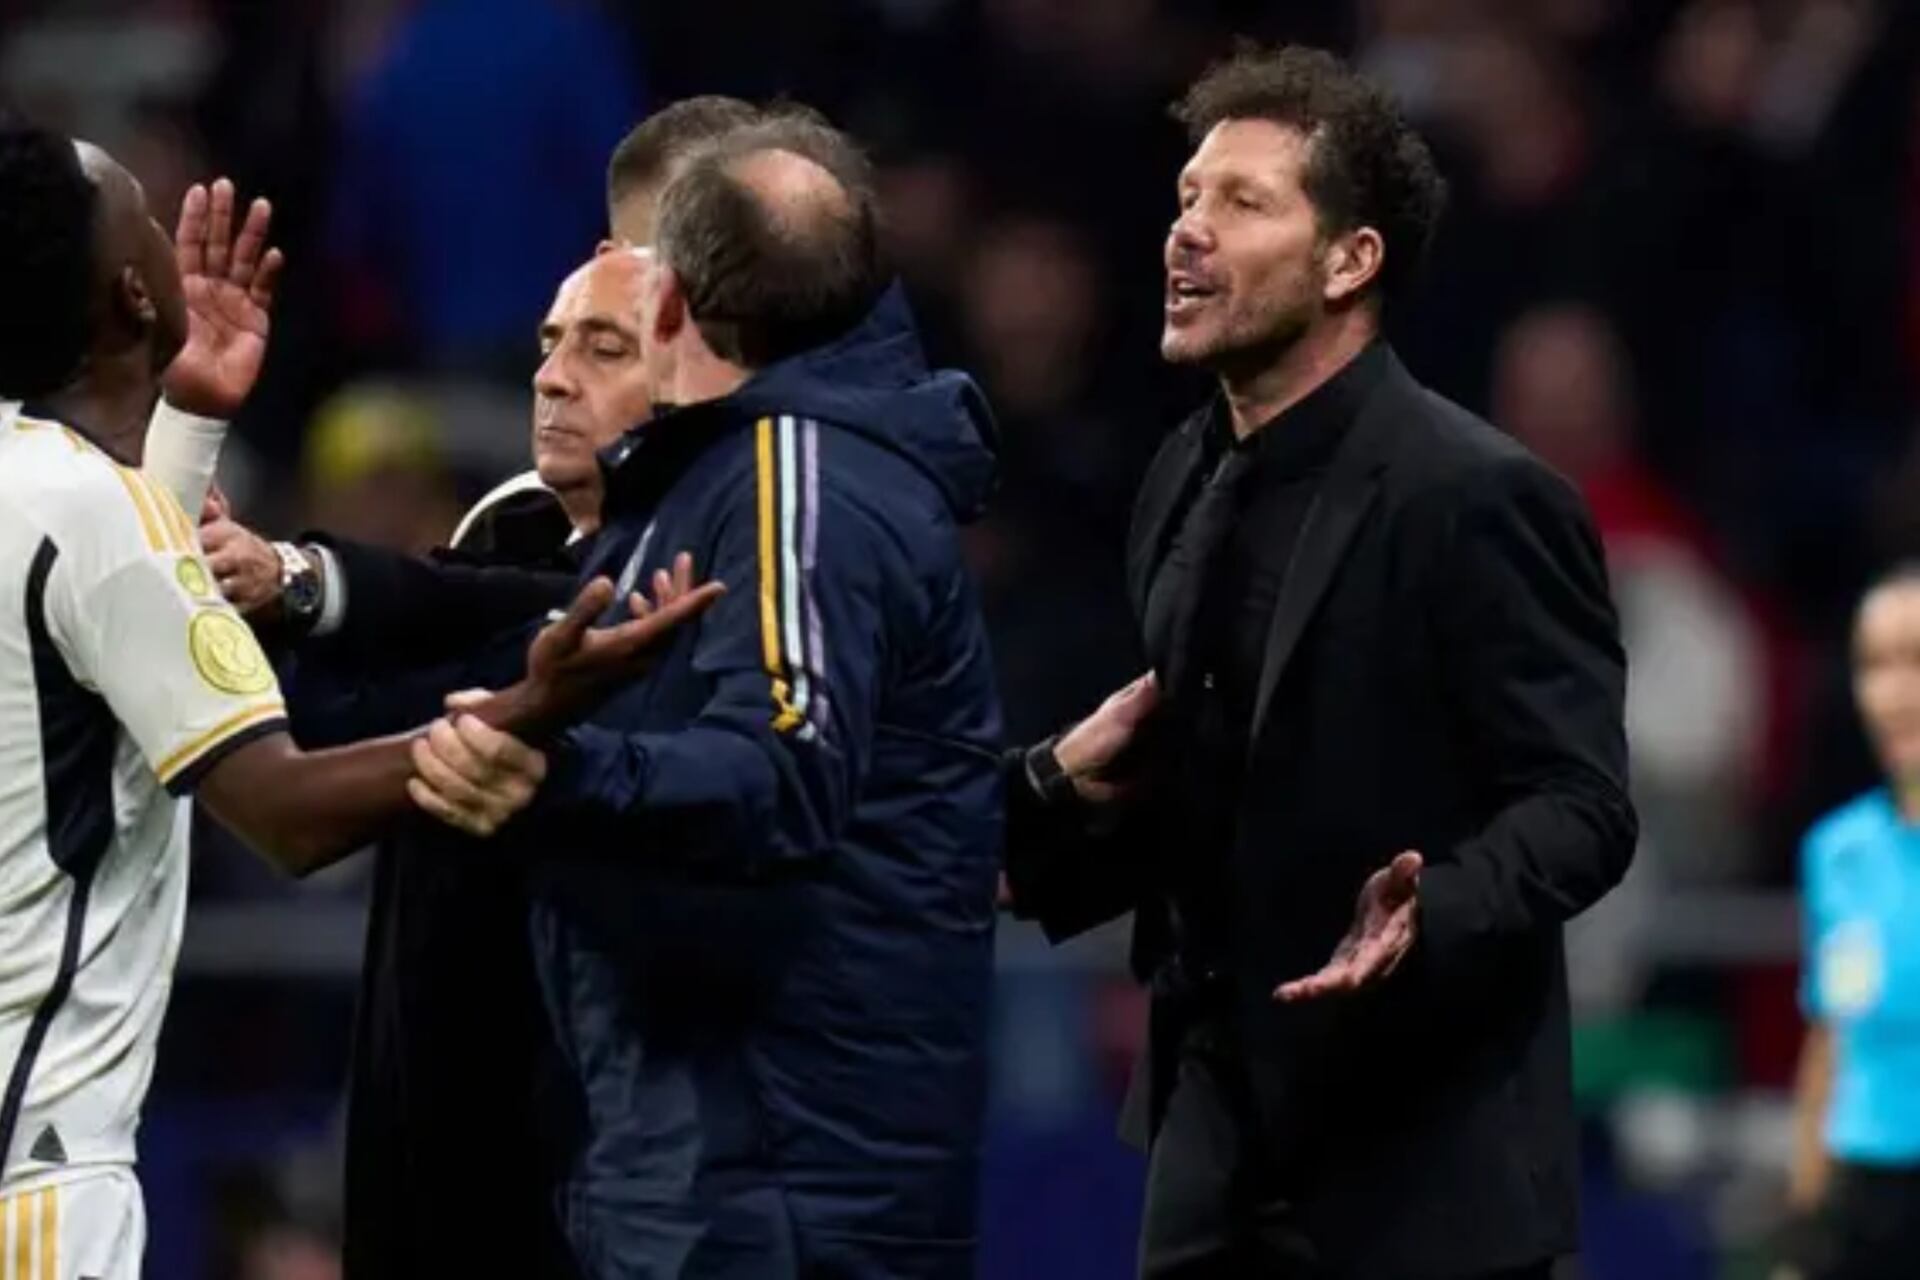 Fight! Vinicius Jr and Diego Simeone almost come to blows after Copa del Rey